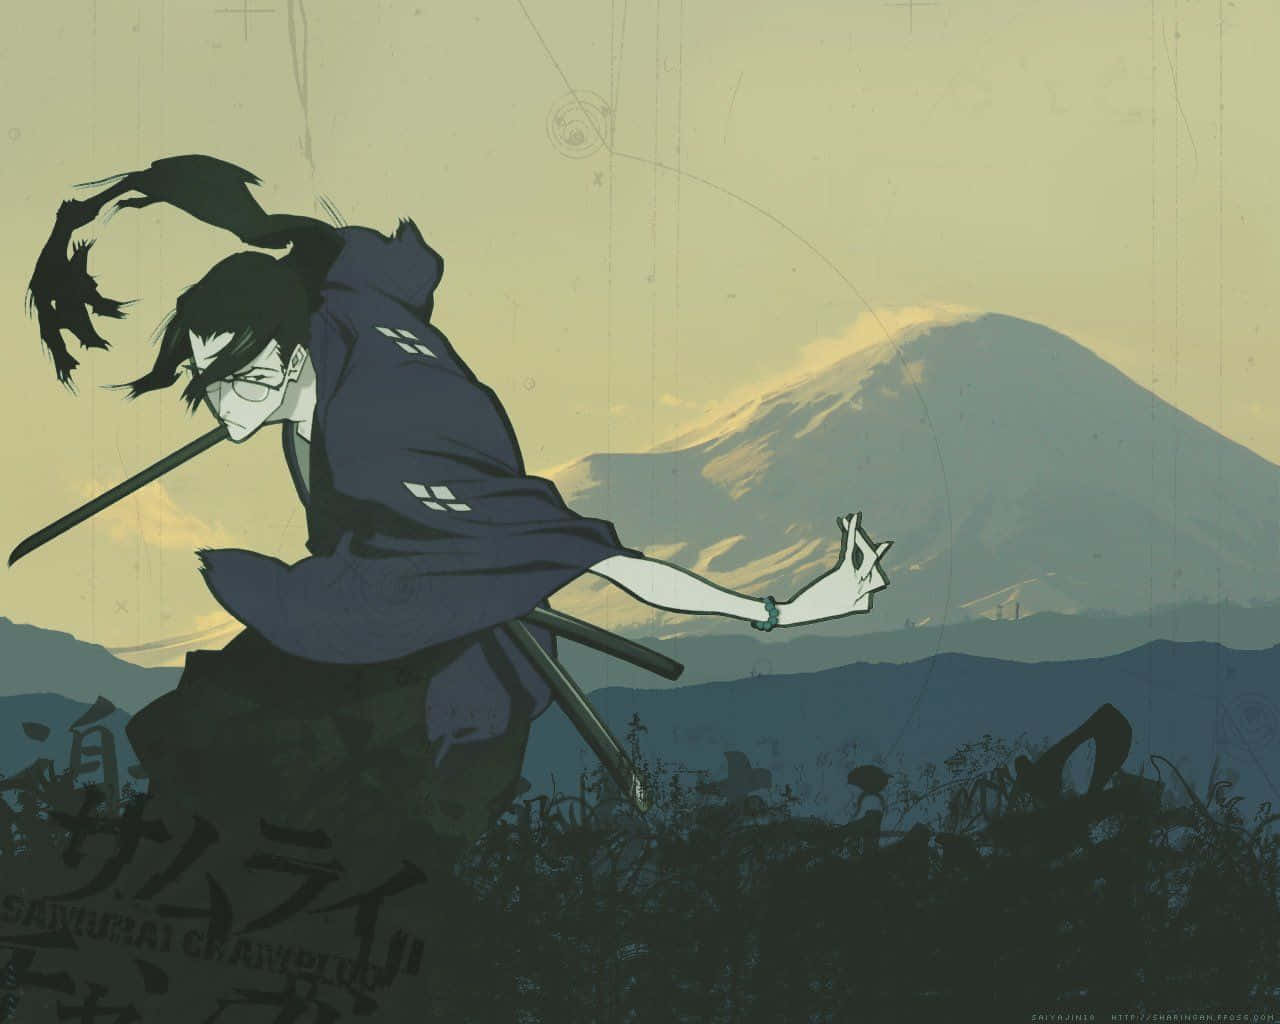 Mugen and Jin, two master samurais from the anime Samurai Champloo